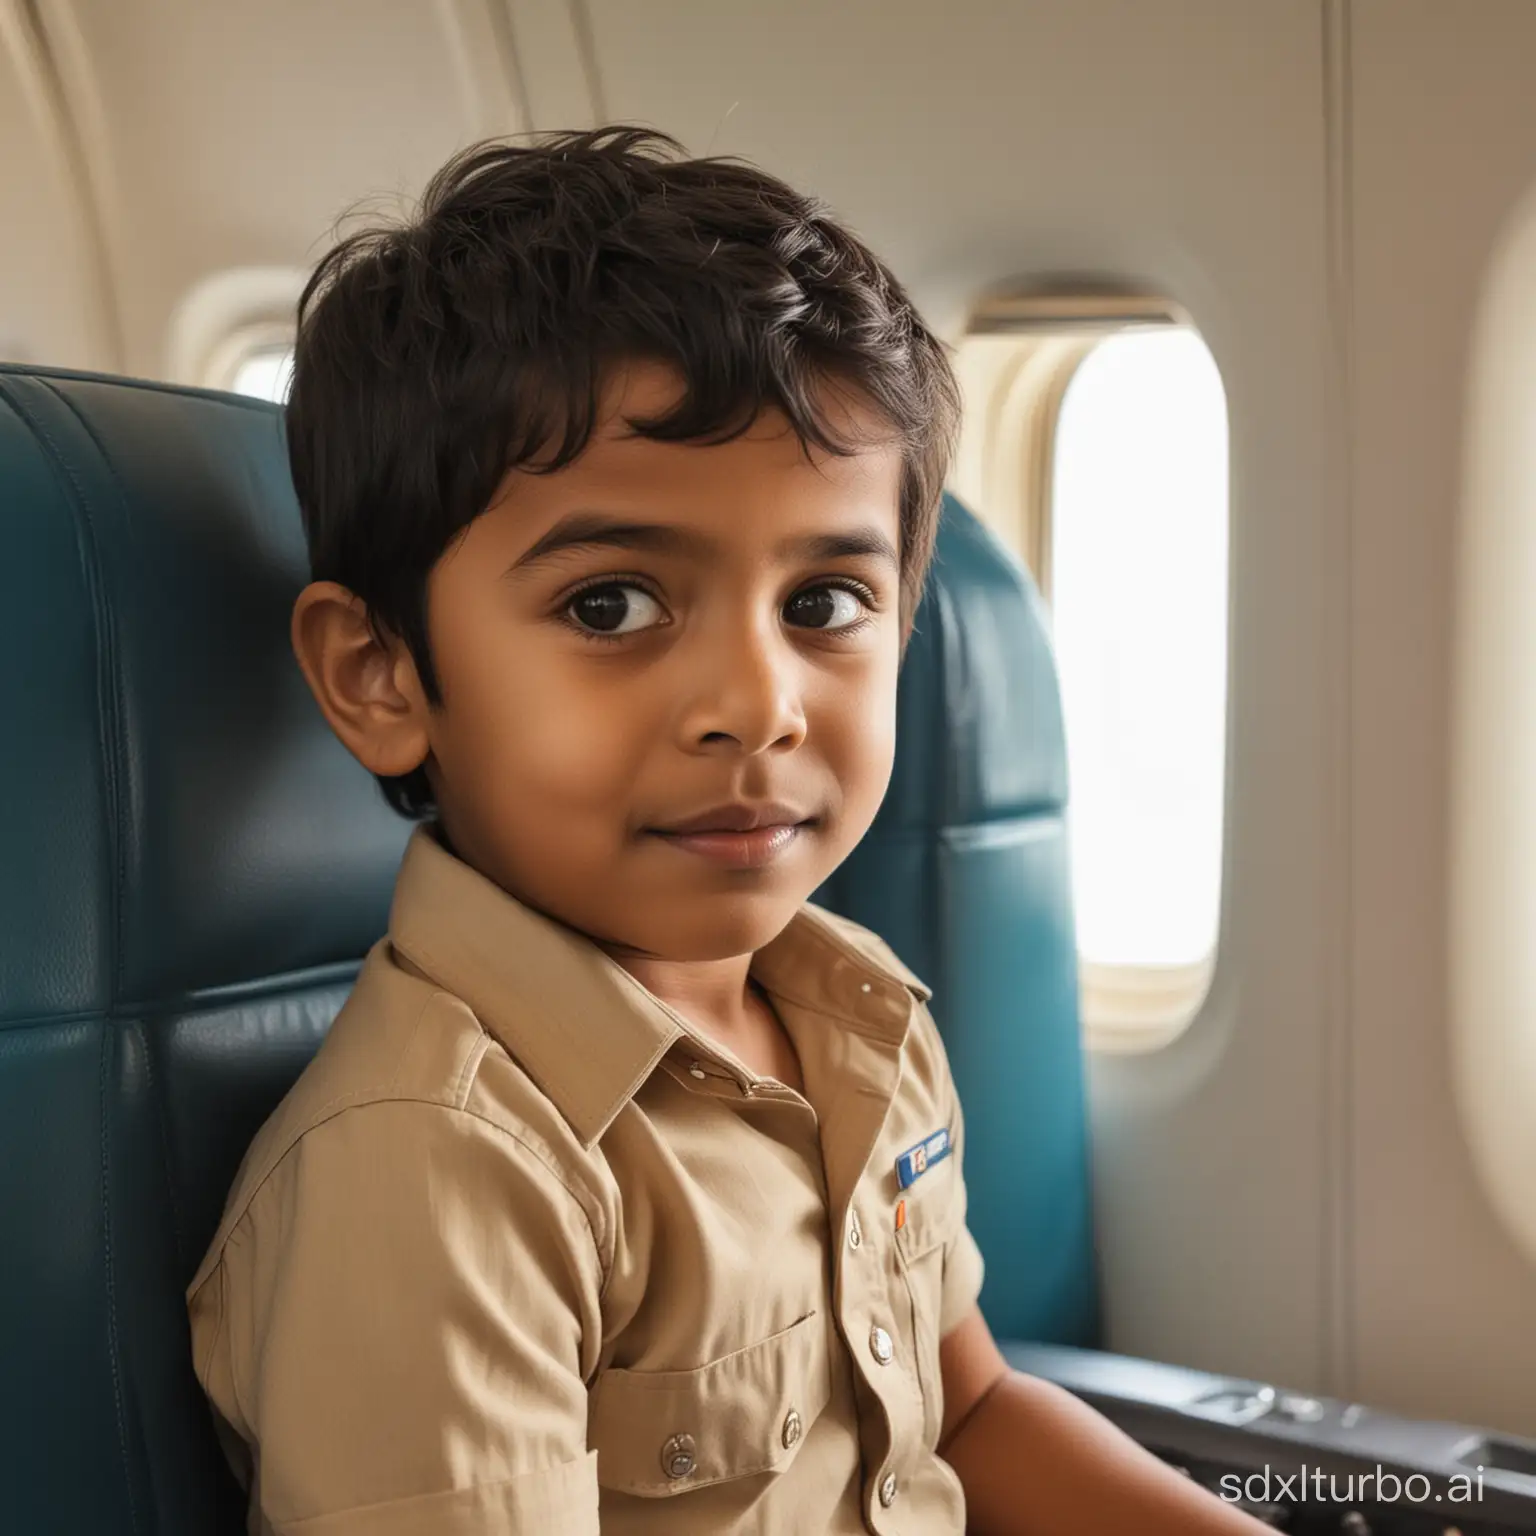 Indian-Toddler-Excitedly-Experiences-First-Airplane-Ride